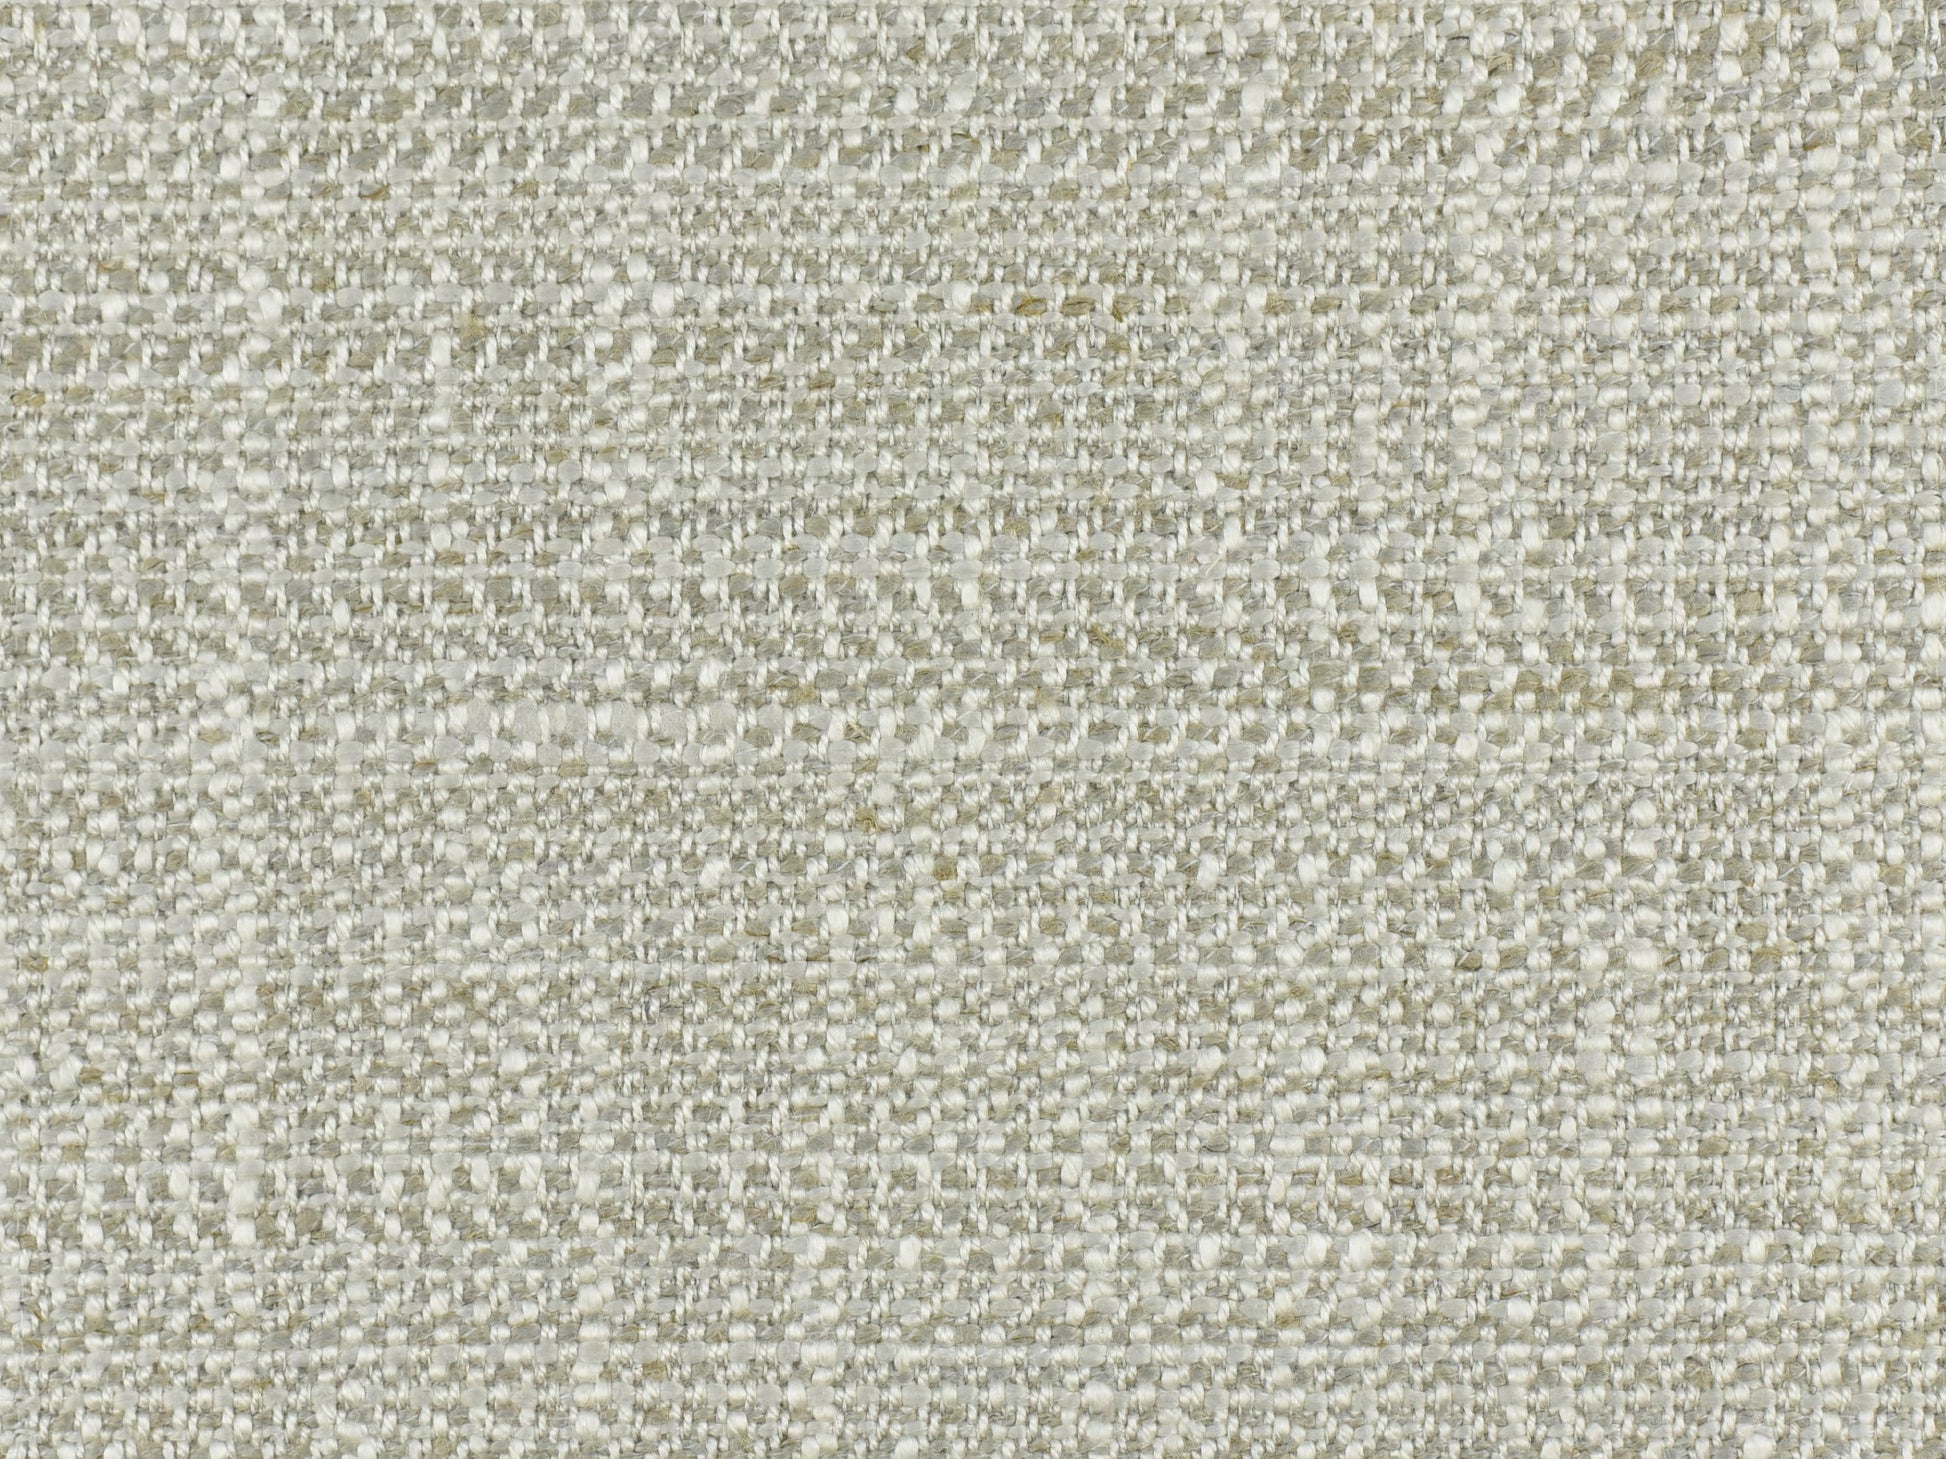 Heavy Duty Linen Blend Strip Woven Design Upholstery Fabric|Linen Fabric By The Yard|Modern Upholstery Fabric For Chair Pillow|57"W/750GSM Hillary